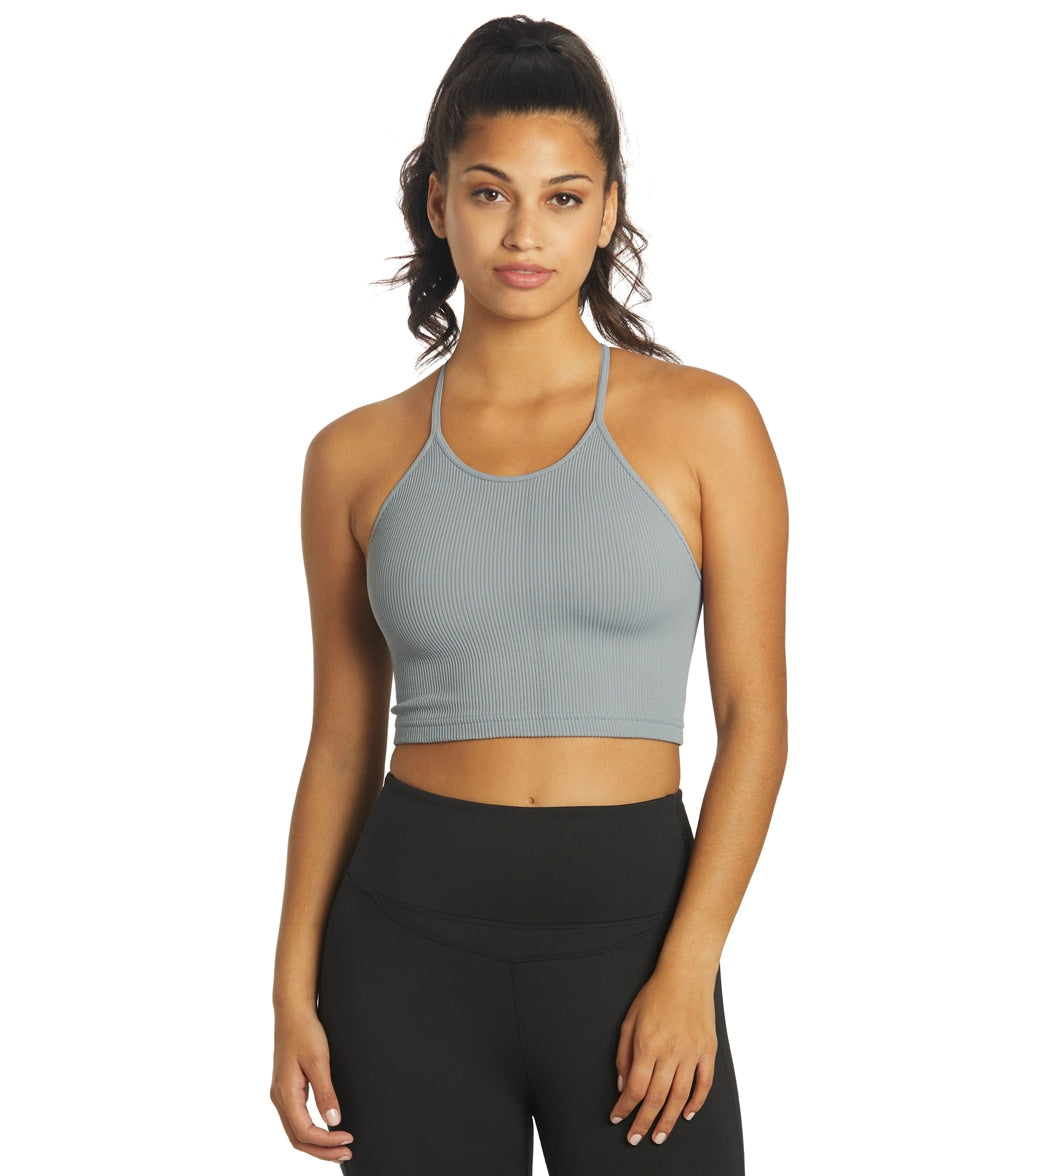 Lavento Women's Yoga Tank Top with Built in Bra Padded Sports